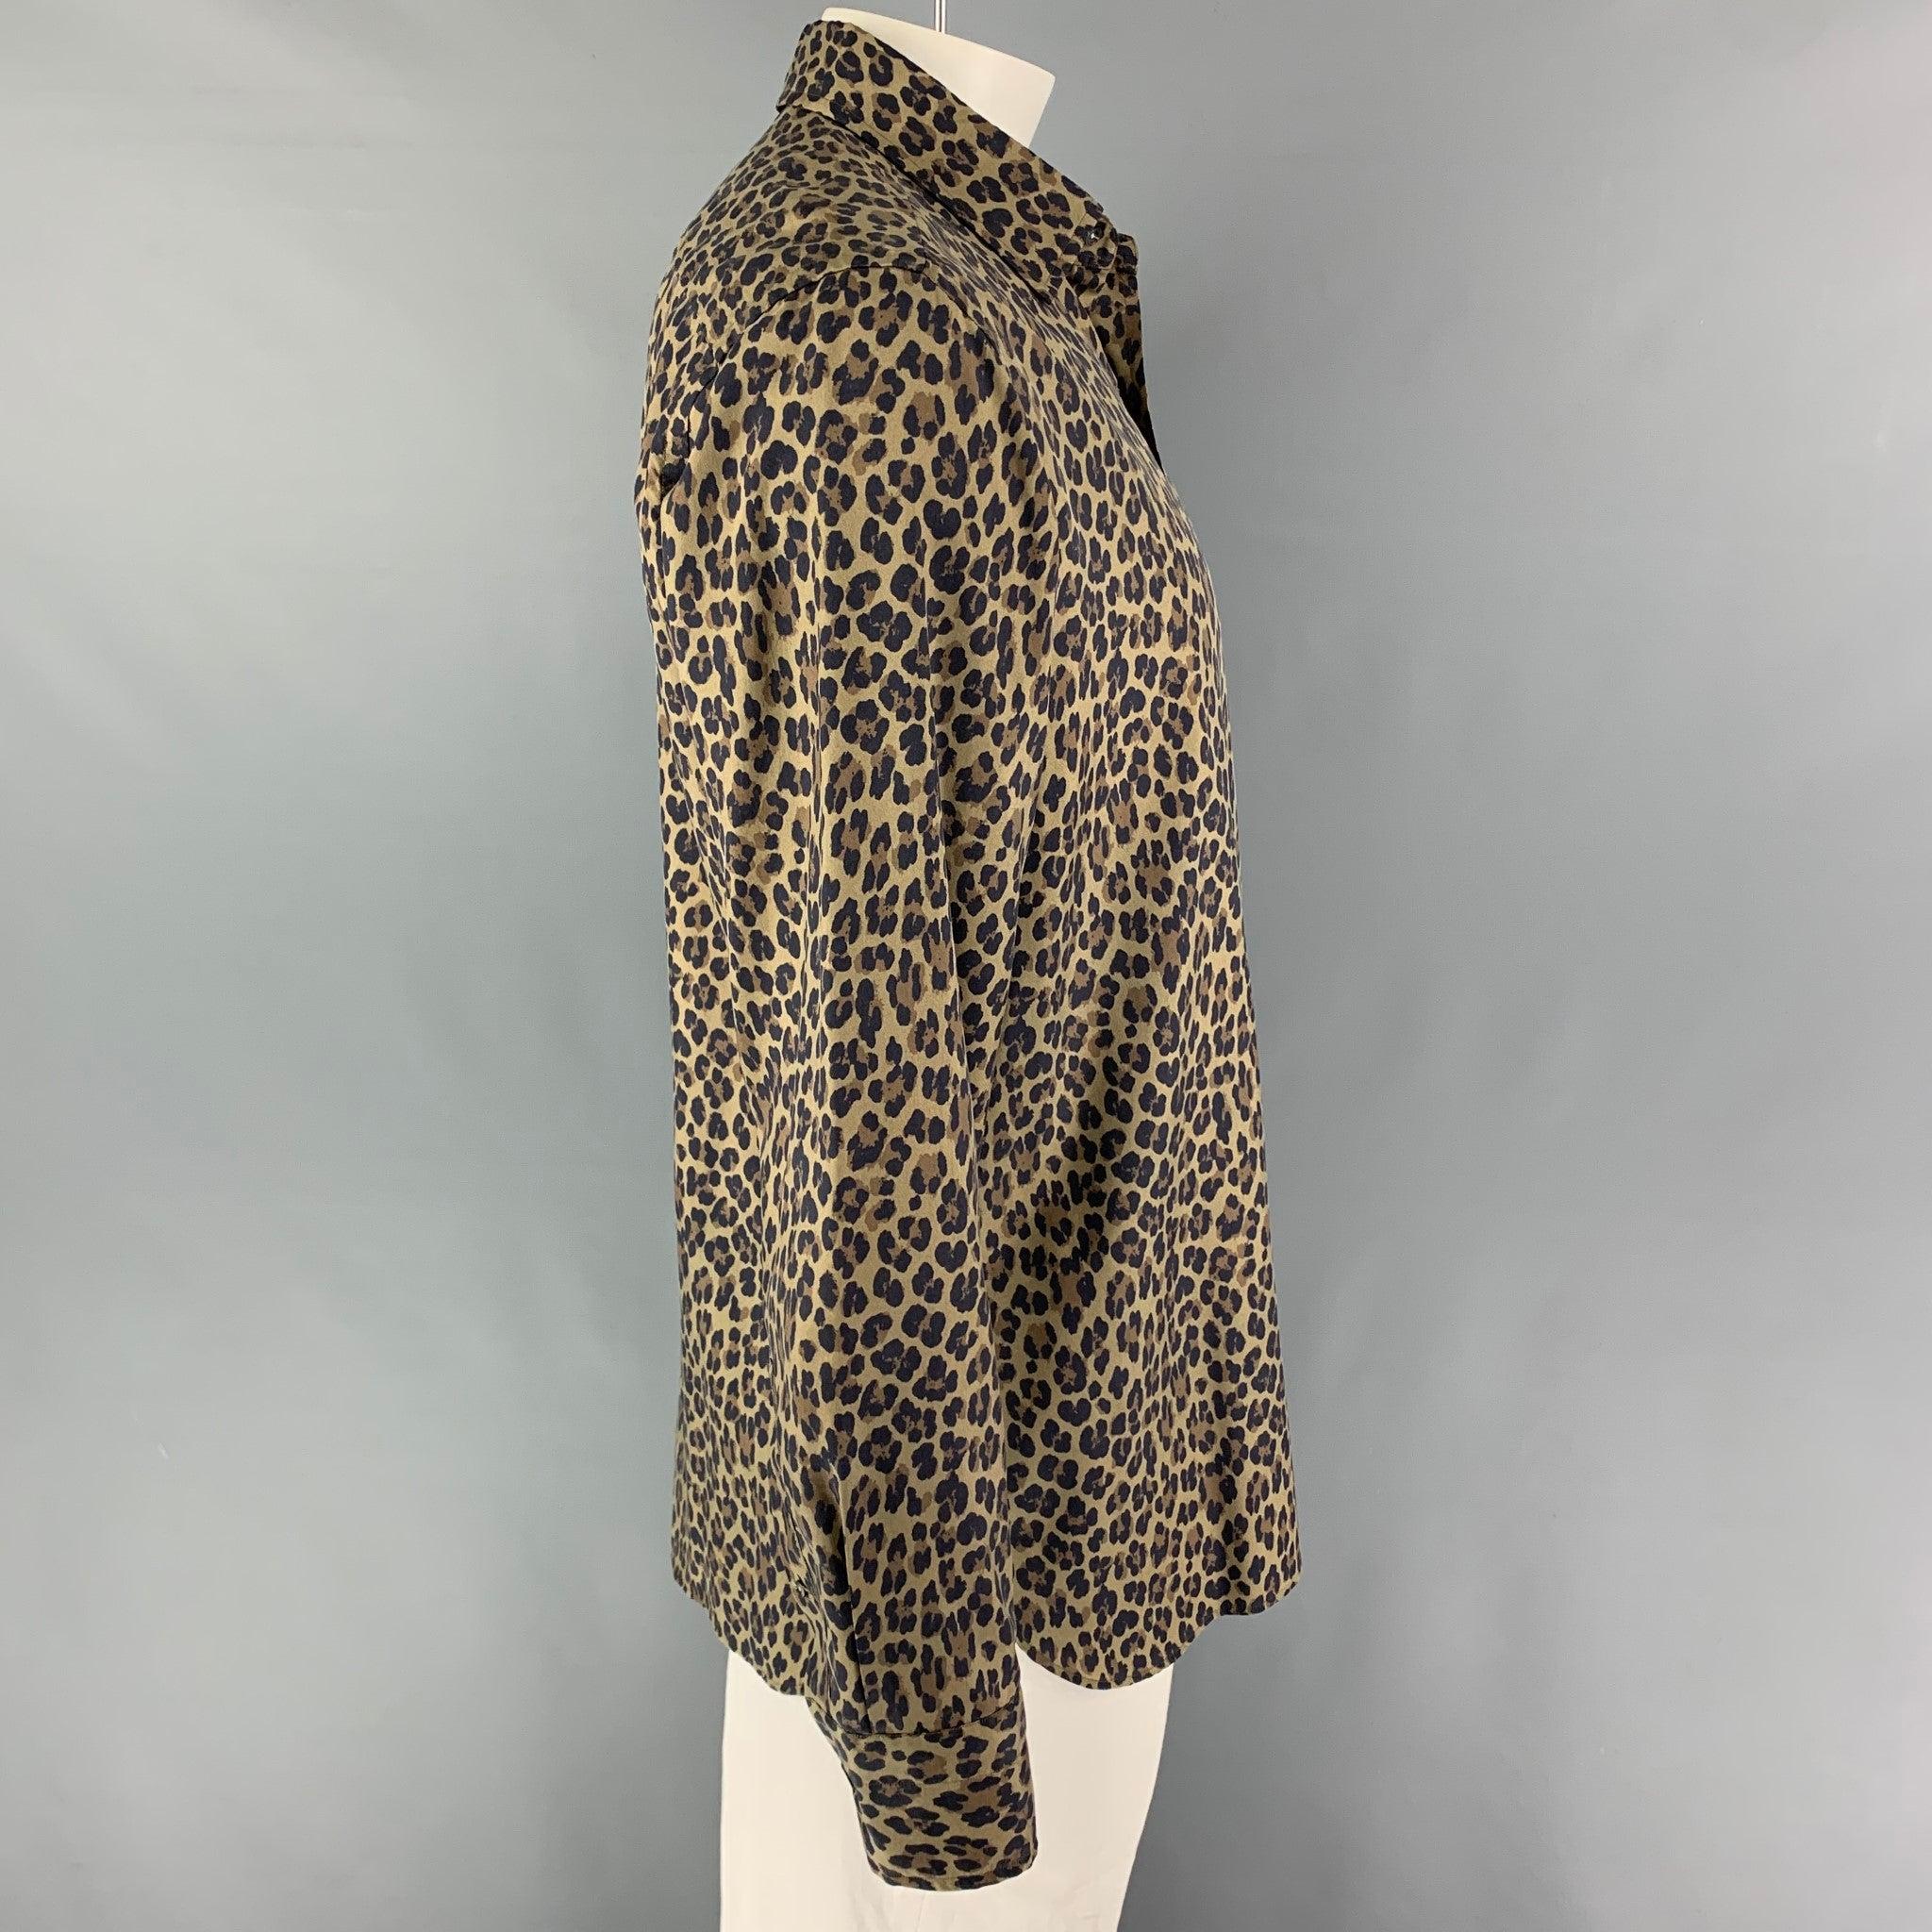 TOM FORD long sleeve shirt comes in a olive & black animal print silk featuring a spread collar and a button up closure. Made in Romania.
Very Good
Pre-Owned Condition. 

Marked:   44/17.5 

Measurements: 
 
Shoulder: 19 inches  Chest: 46 inches 